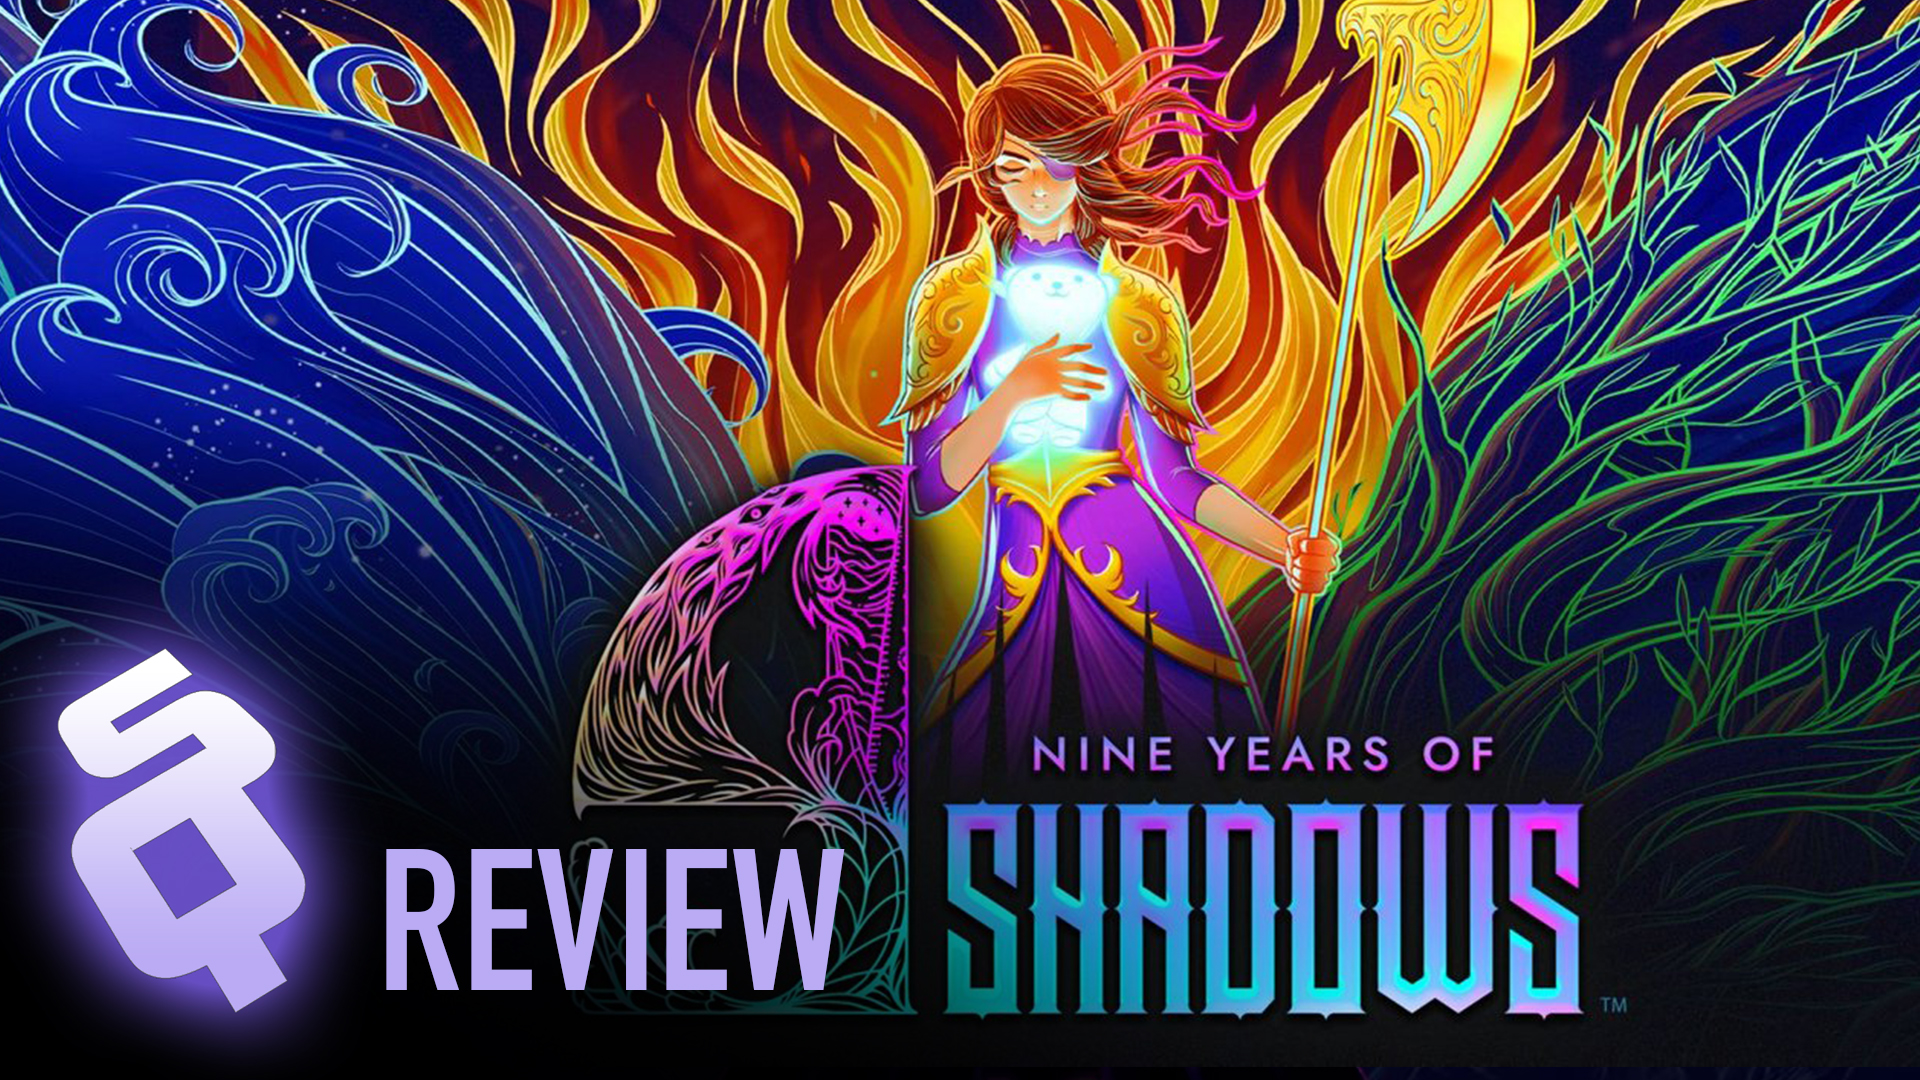 9 Years of Shadows review